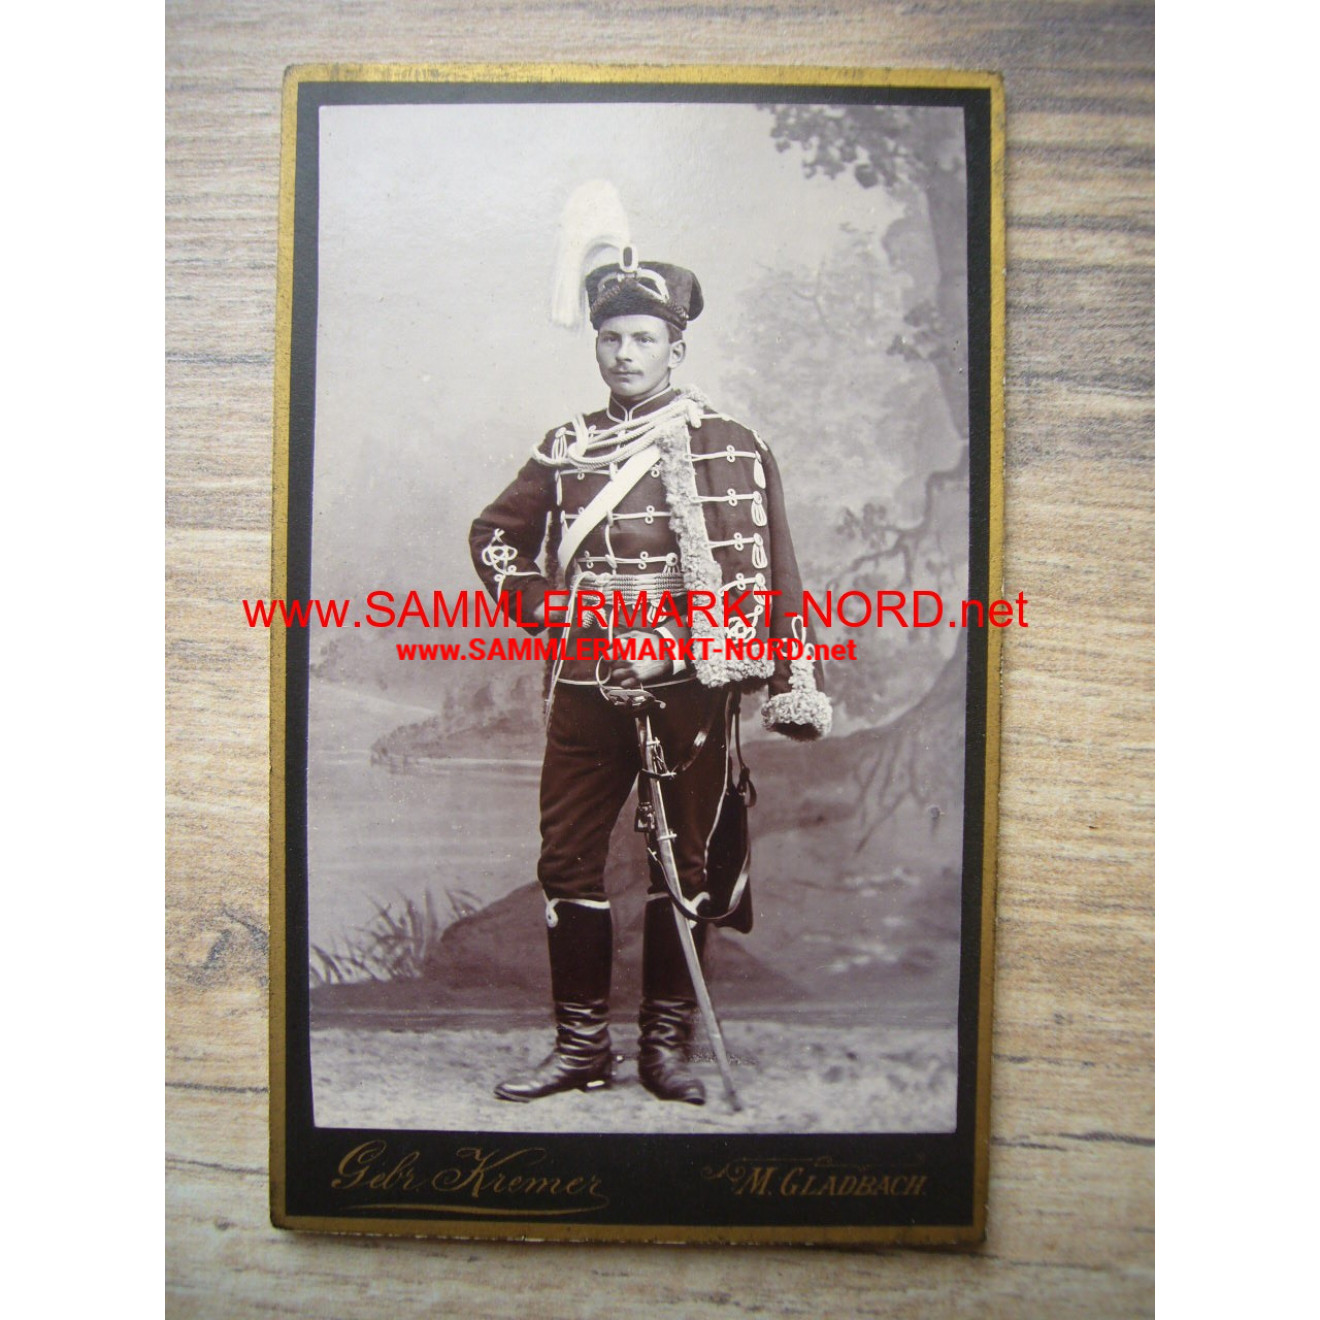 Cabinet photo - hussar with fur hat & saber